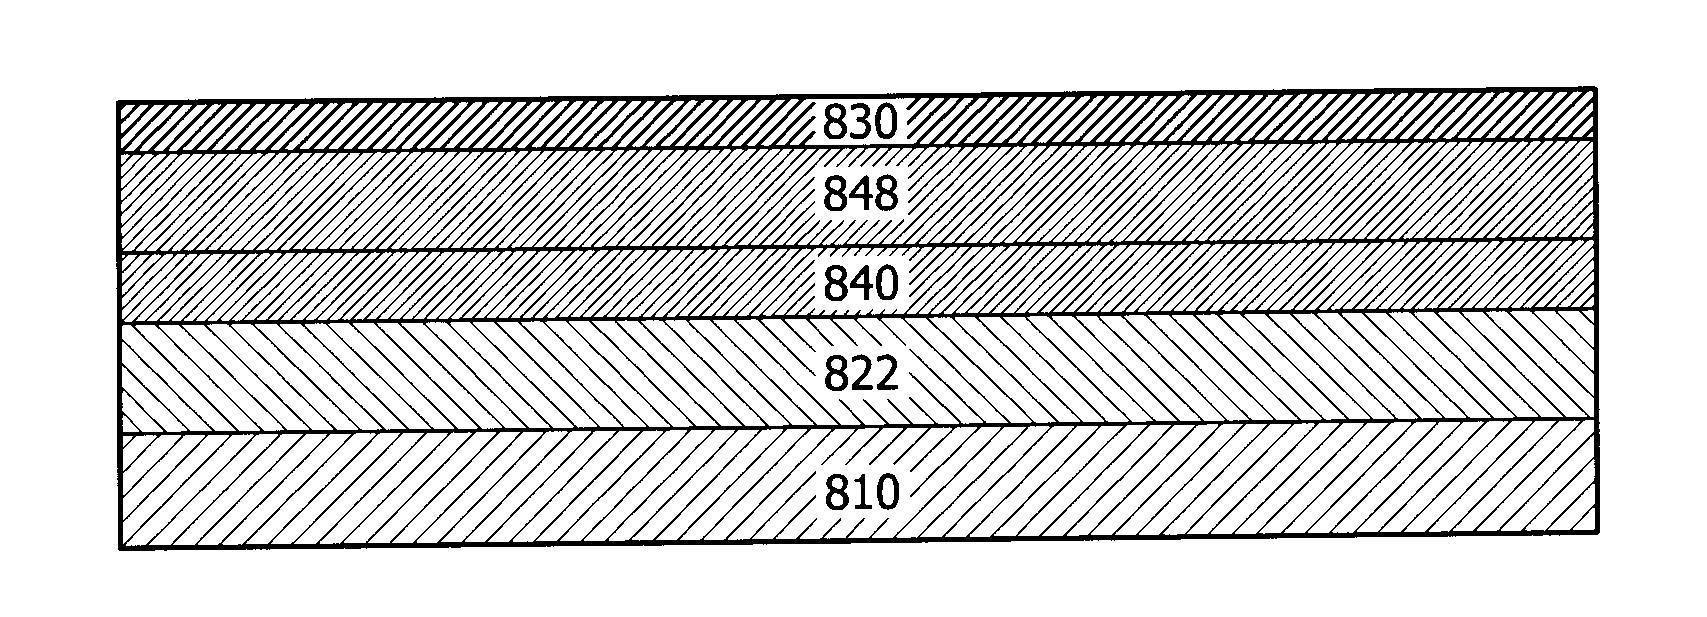 Barrier materials for display devices